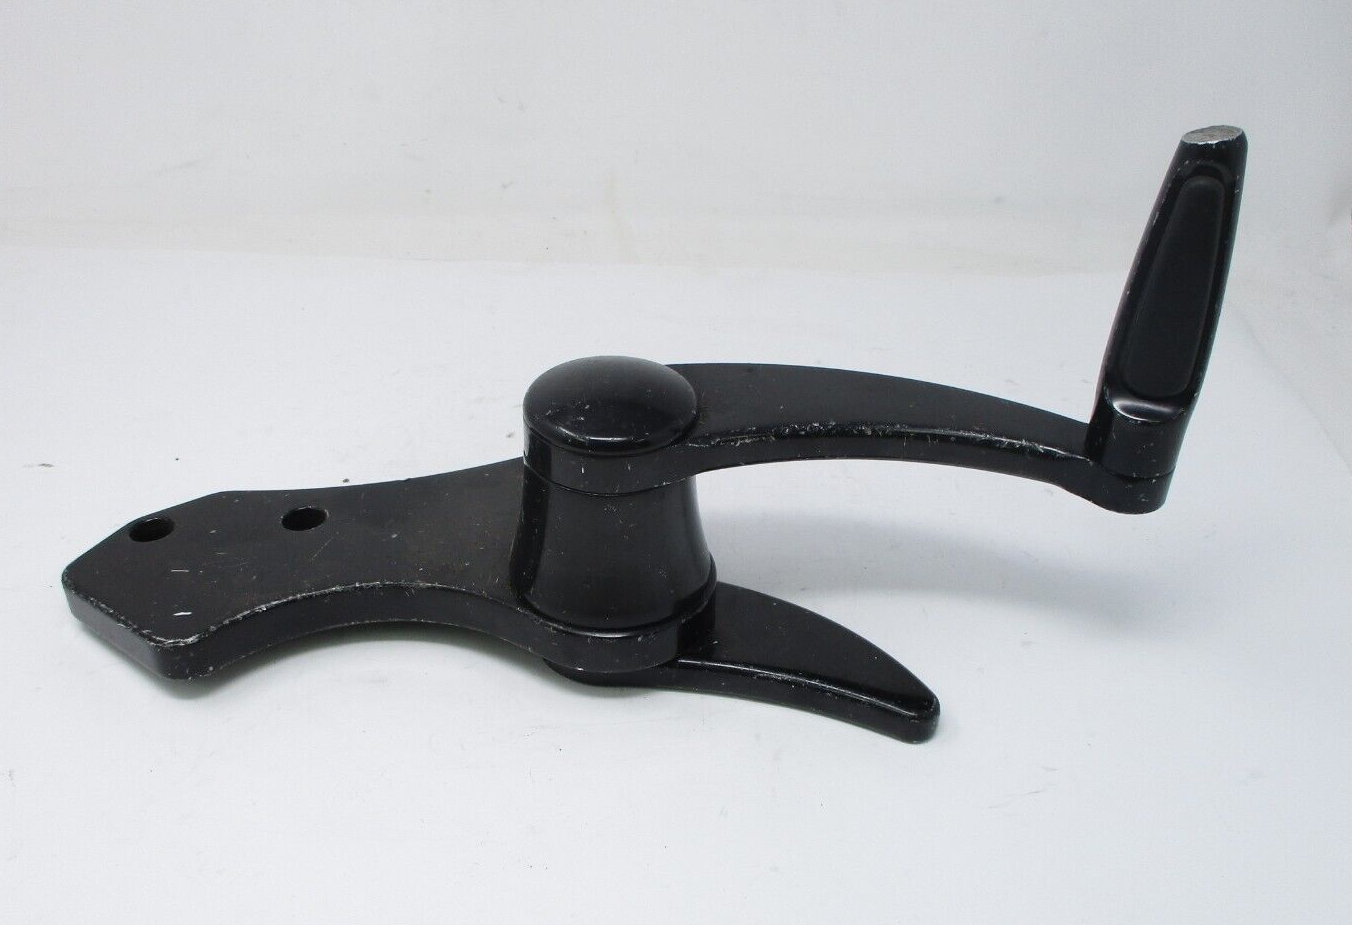 HHI Brand Steel Left Side Forward Control Shifter and Mount (Bent)